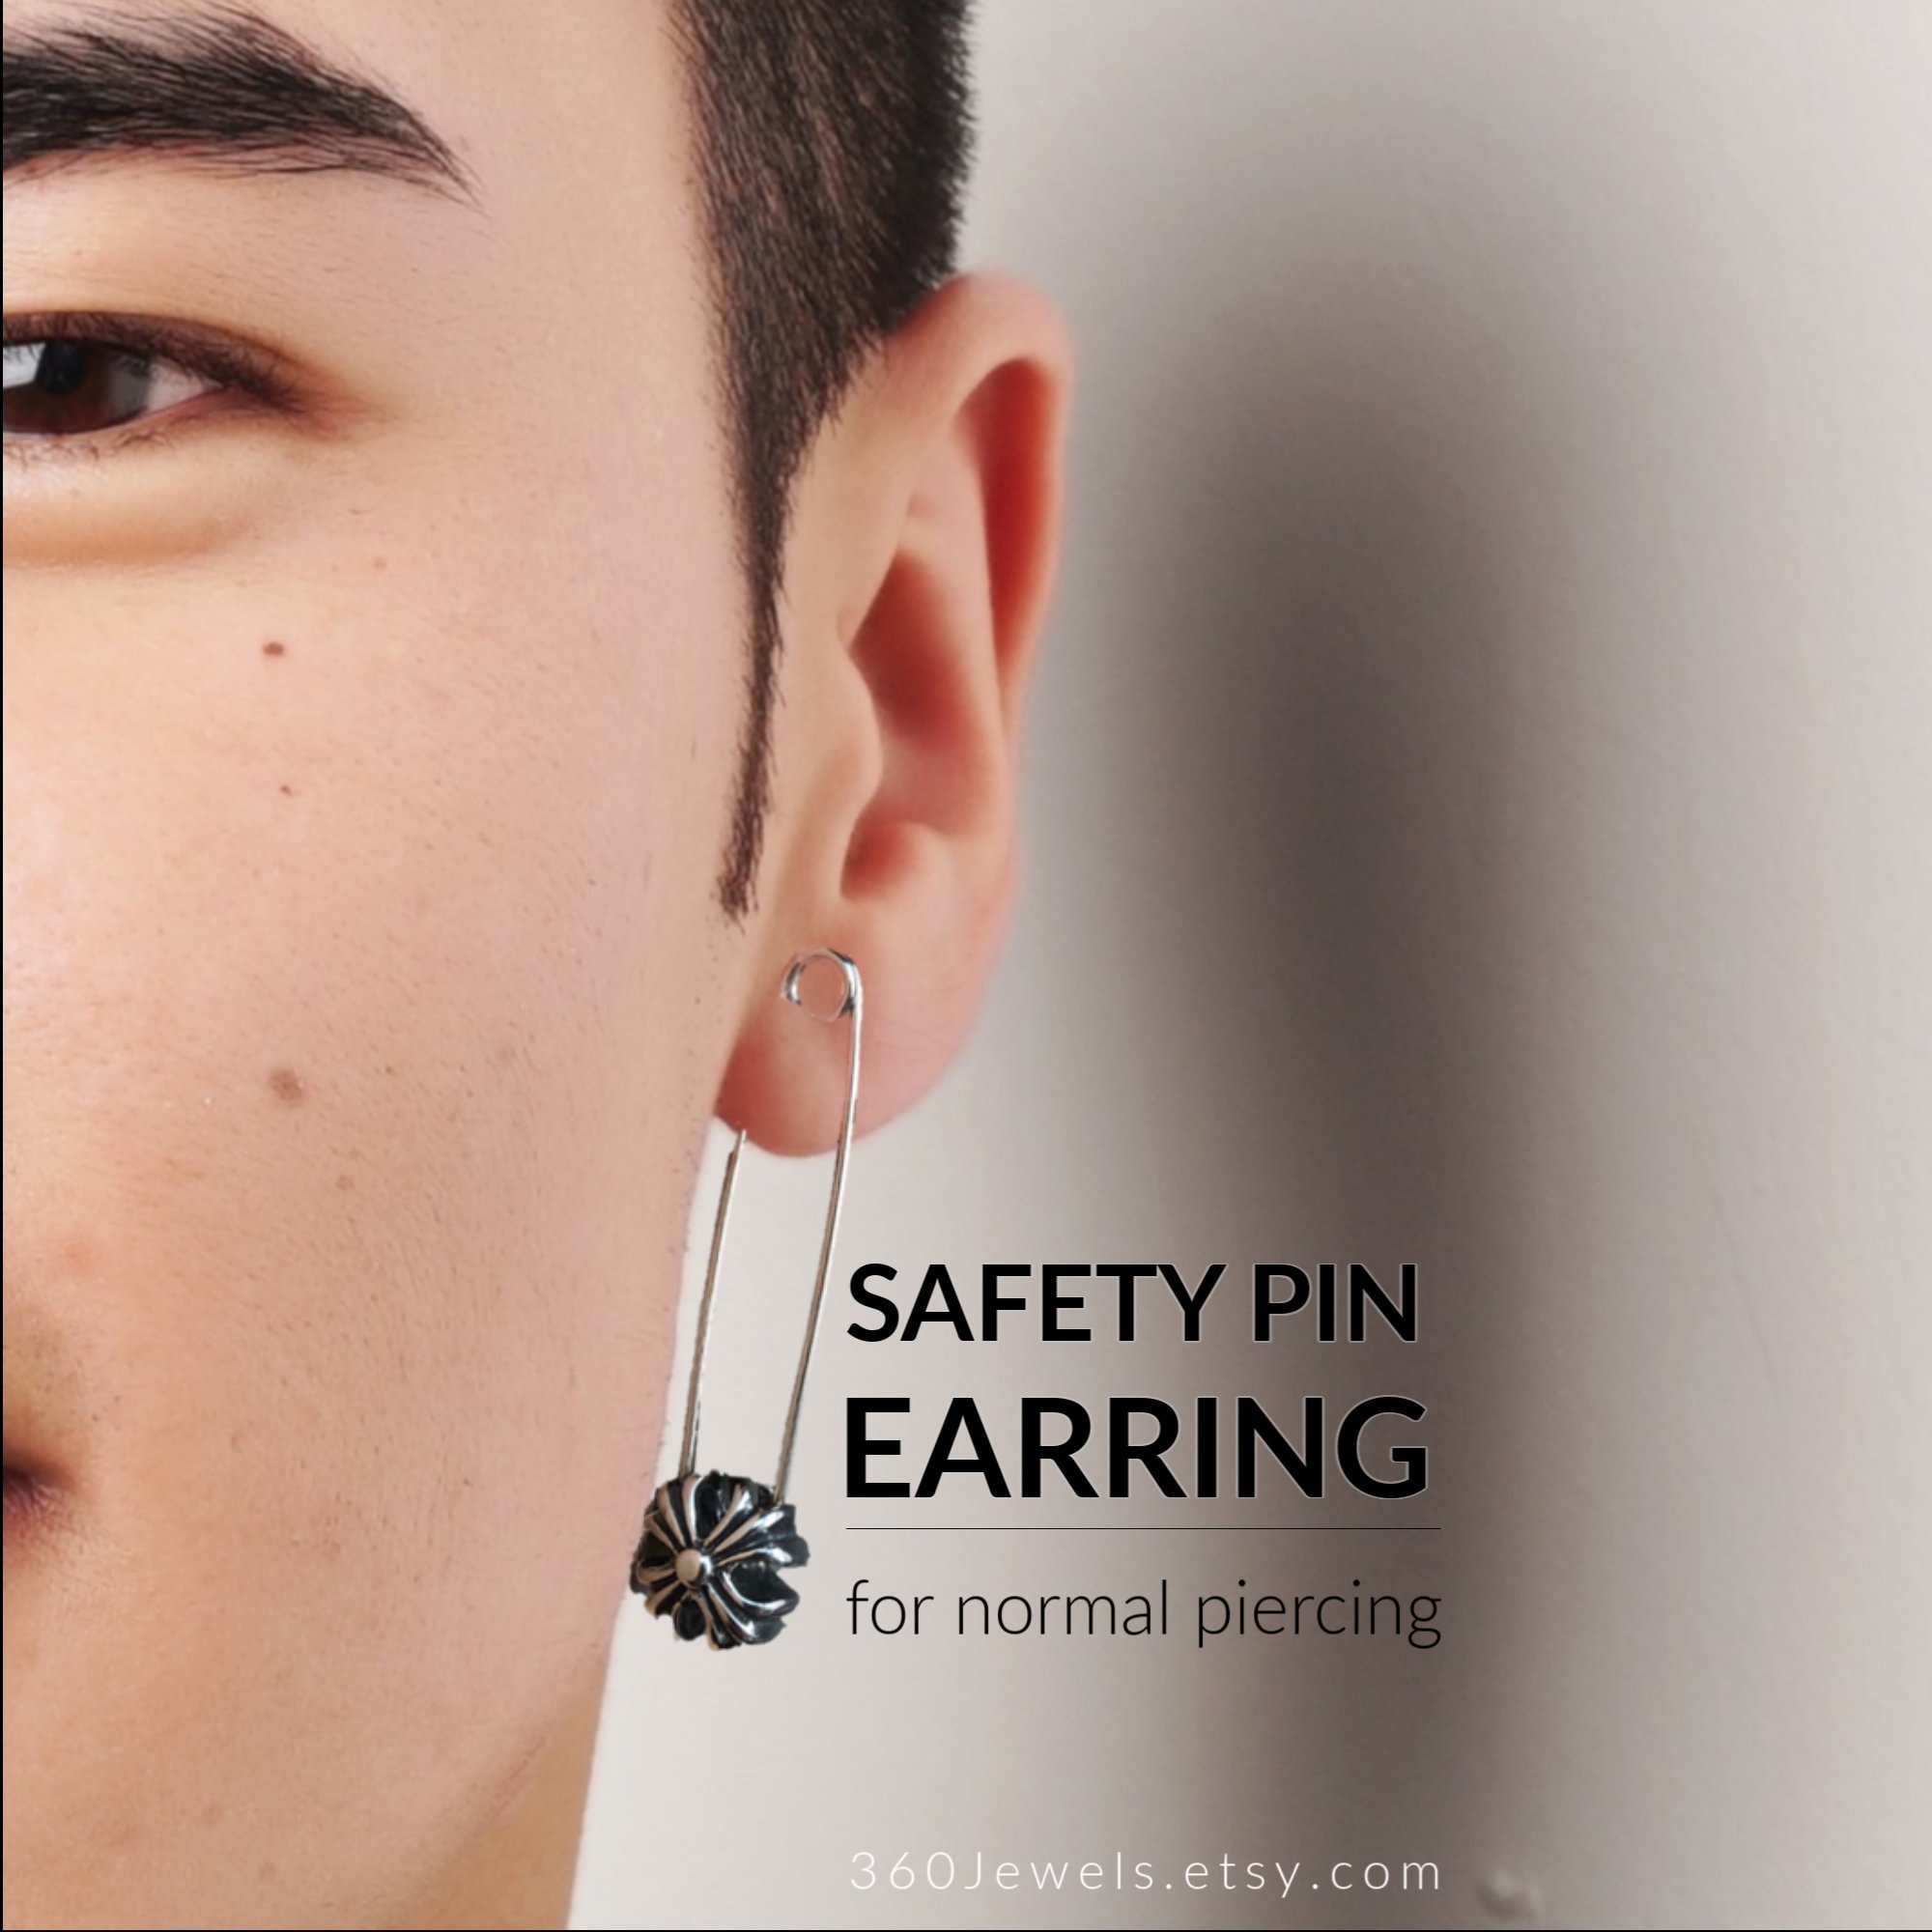 Top more than 78 safety pin earrings men best